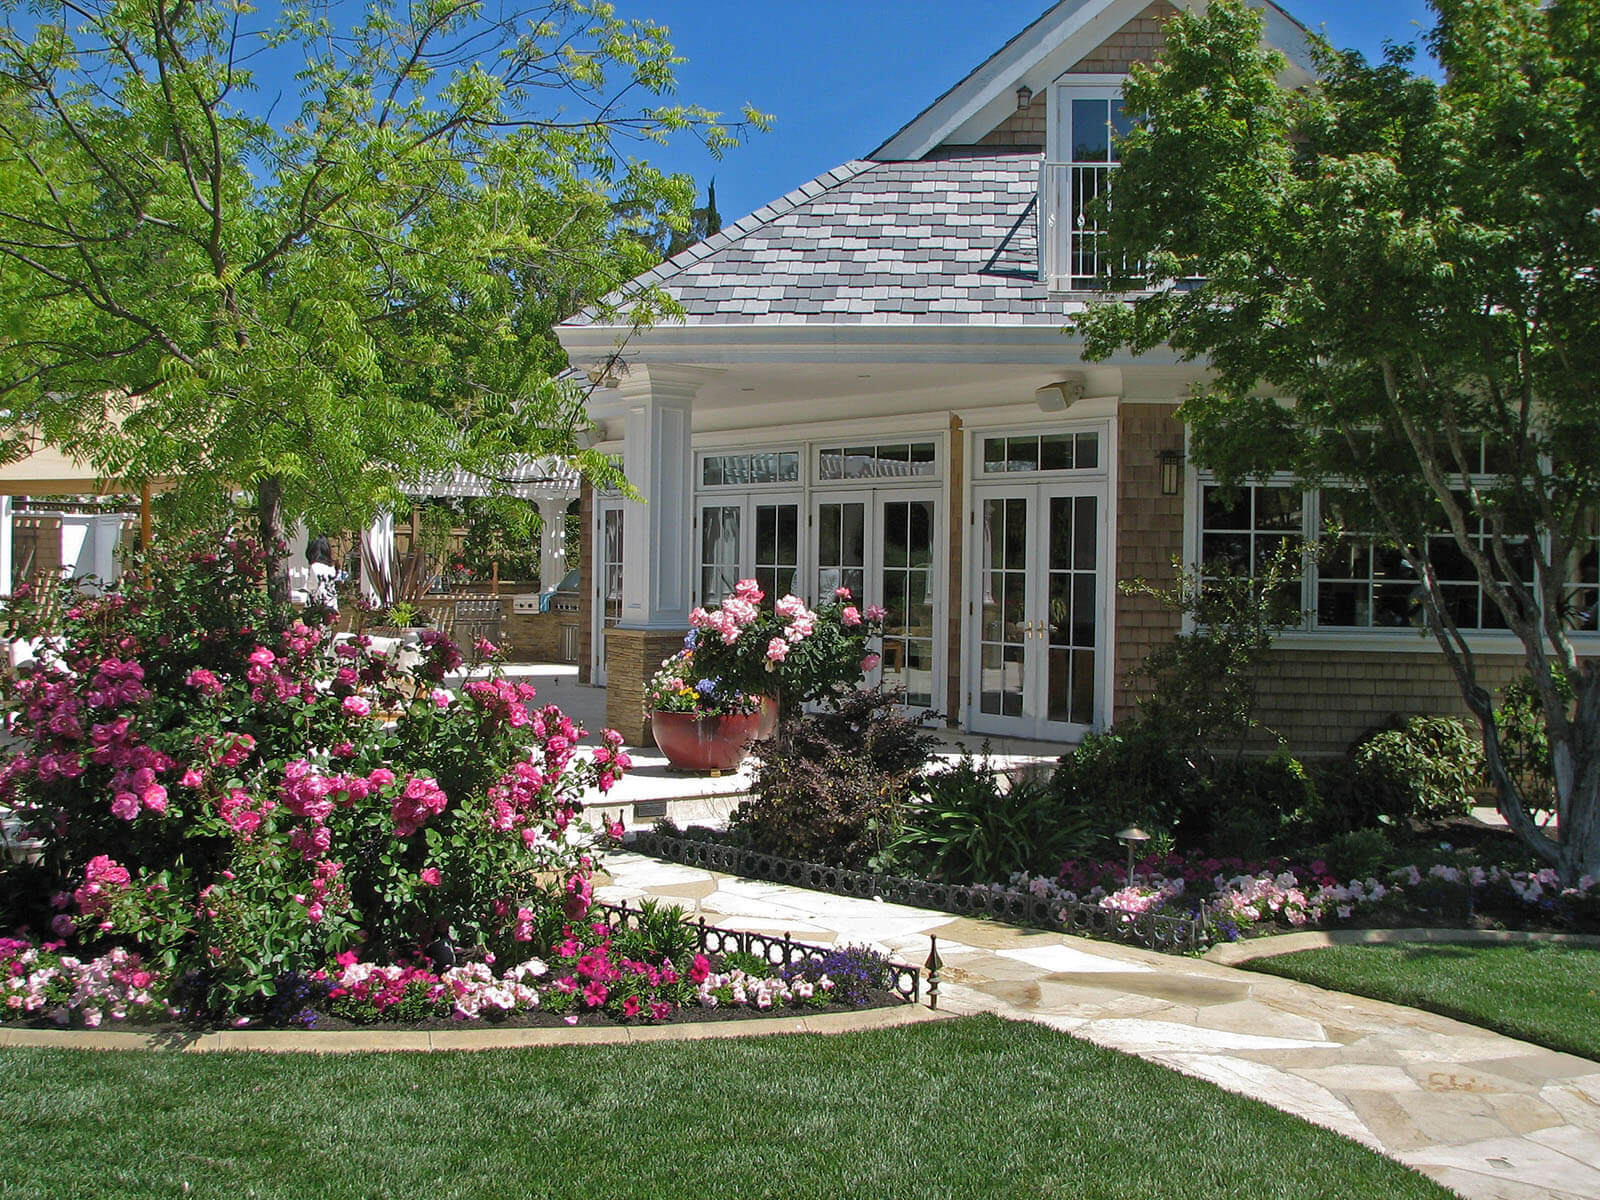 manicured lawn with stone tile path with wrought iron path borders of flowering garden patches neatly placed around a raised stone patio with extending roof with white column